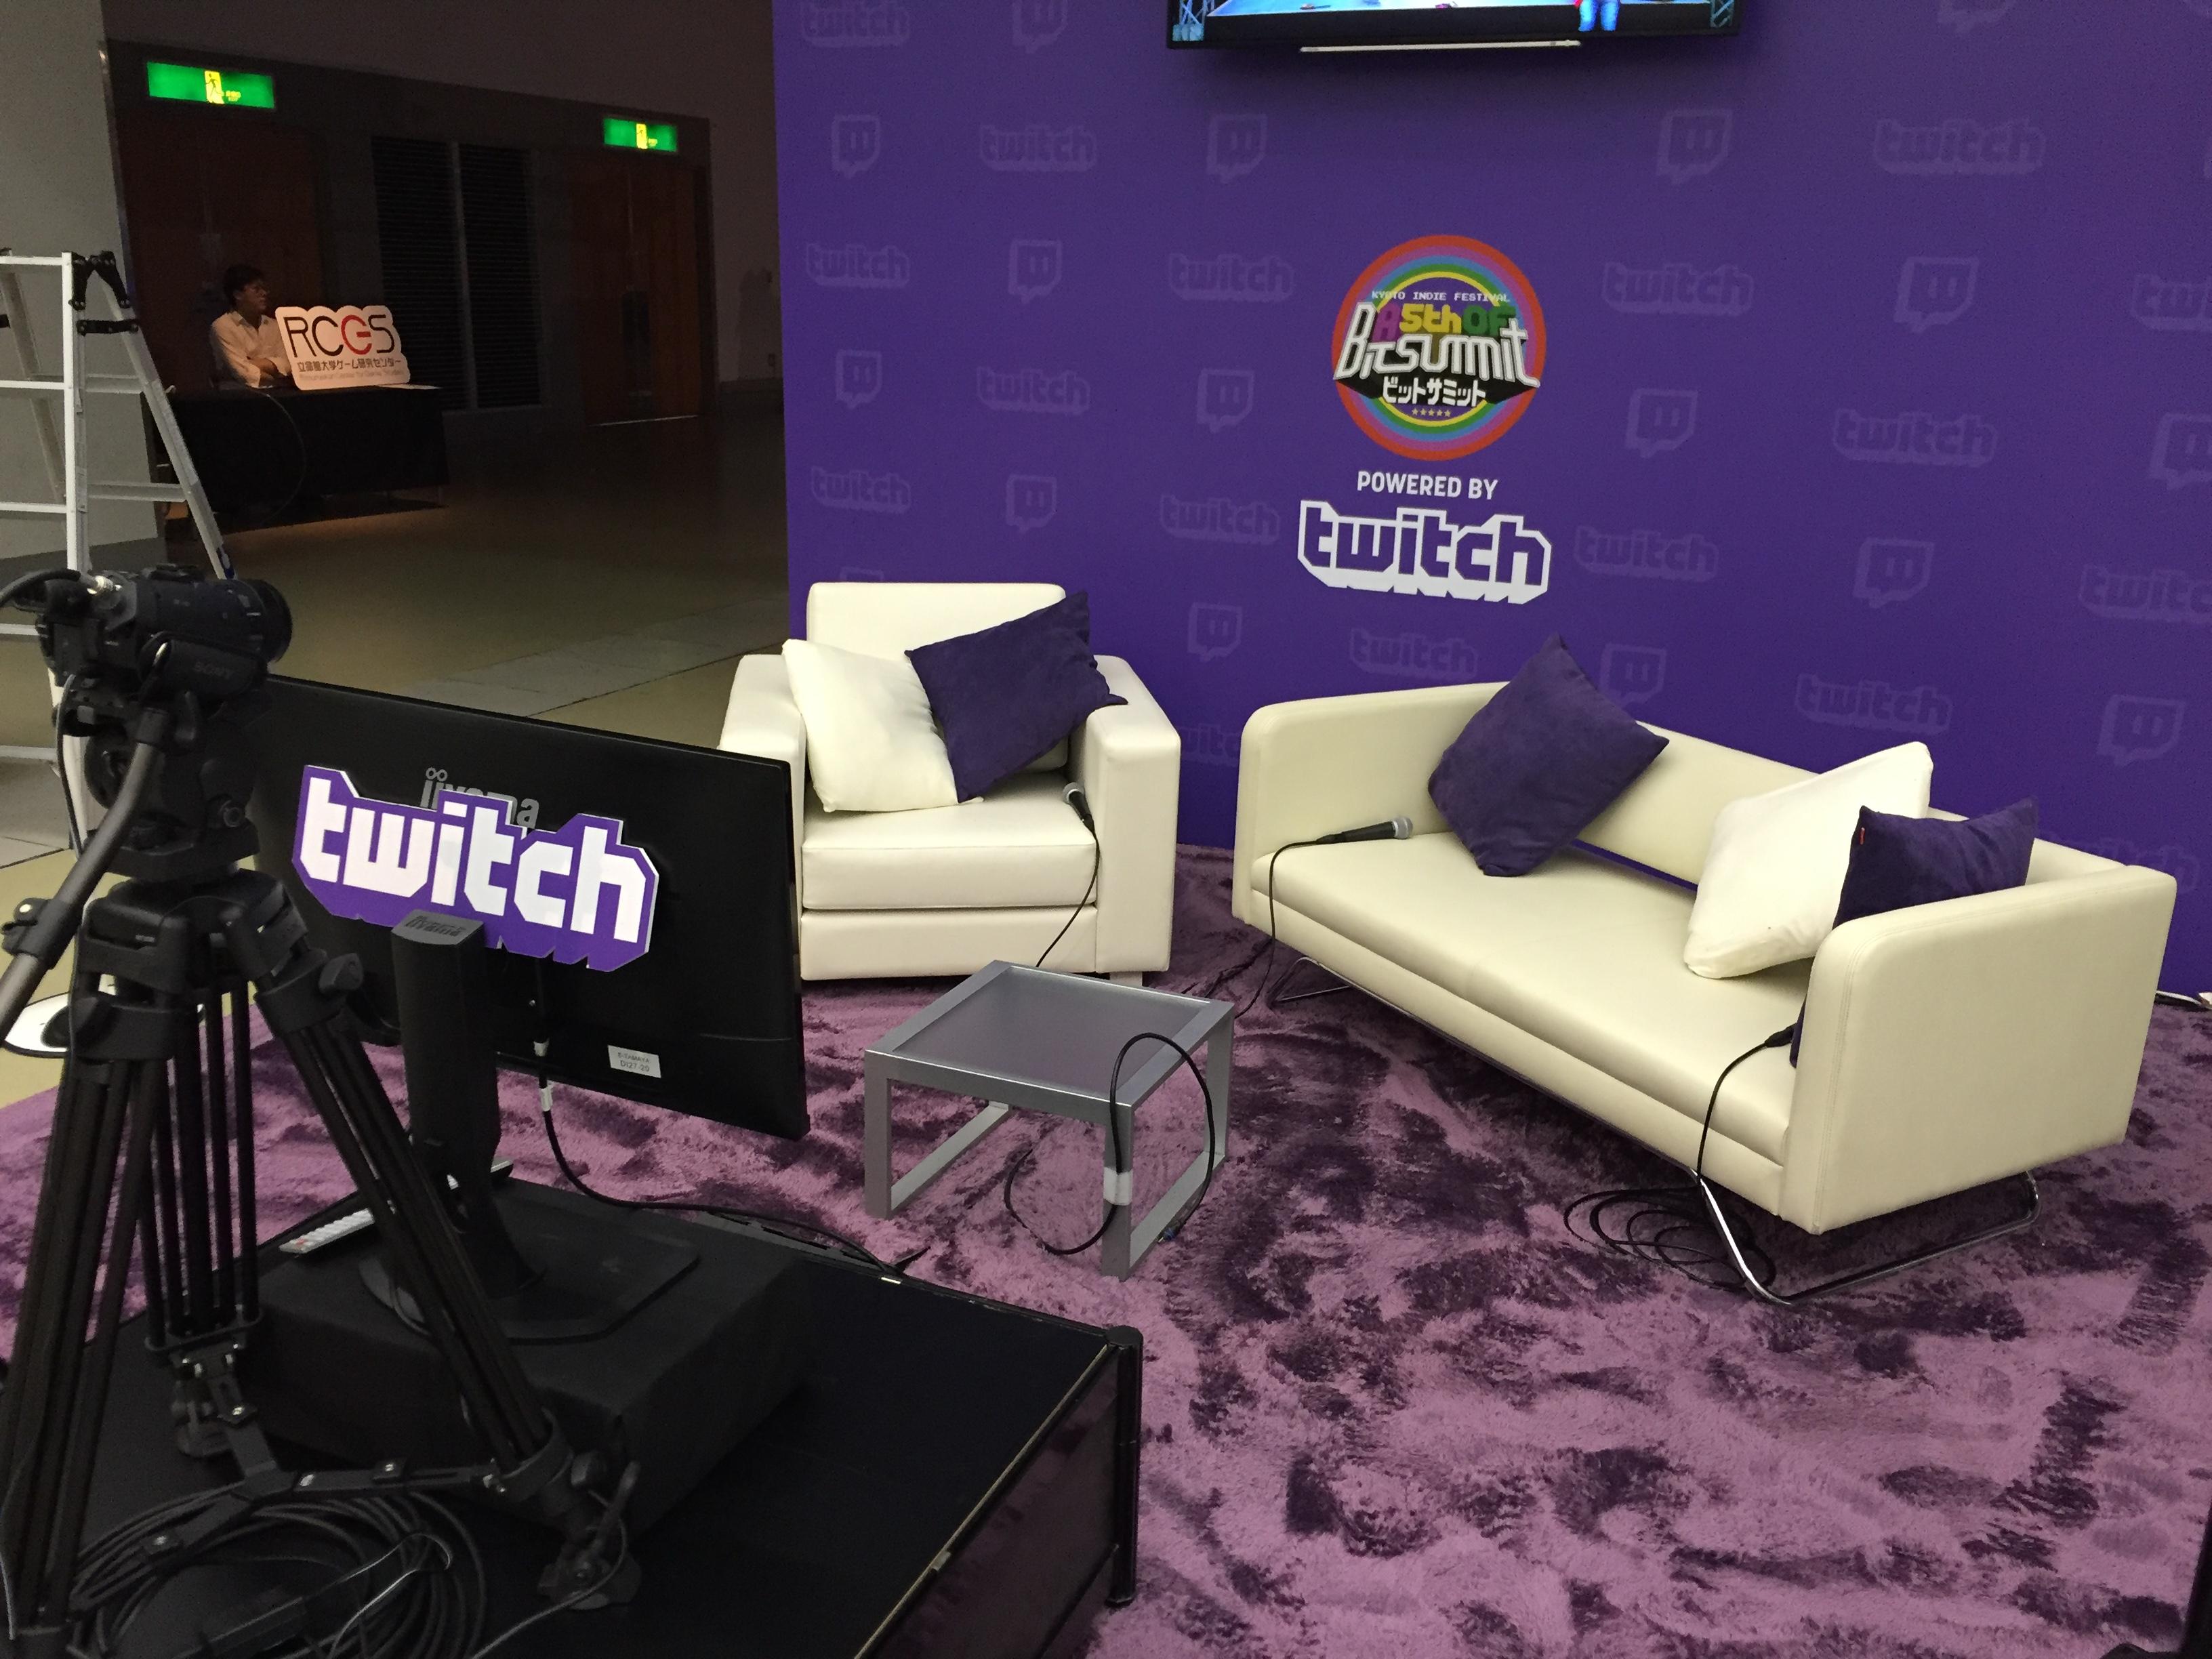 BitSummit 5th Twitch Booth